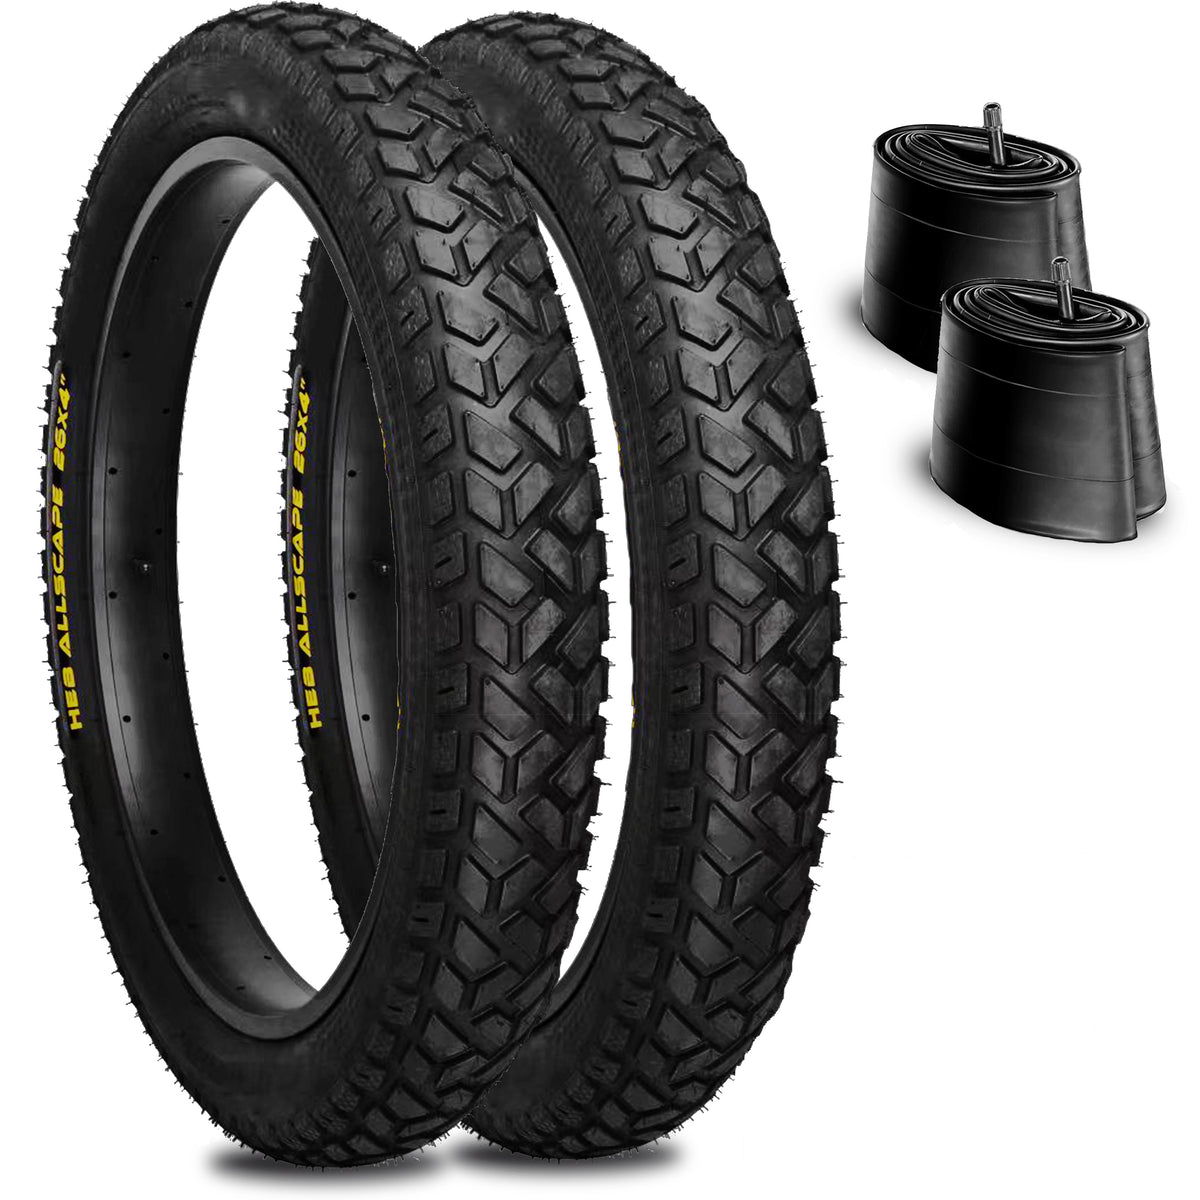 HEB Allscape 26 X 4 Fat Tires + Tubes for Ebike